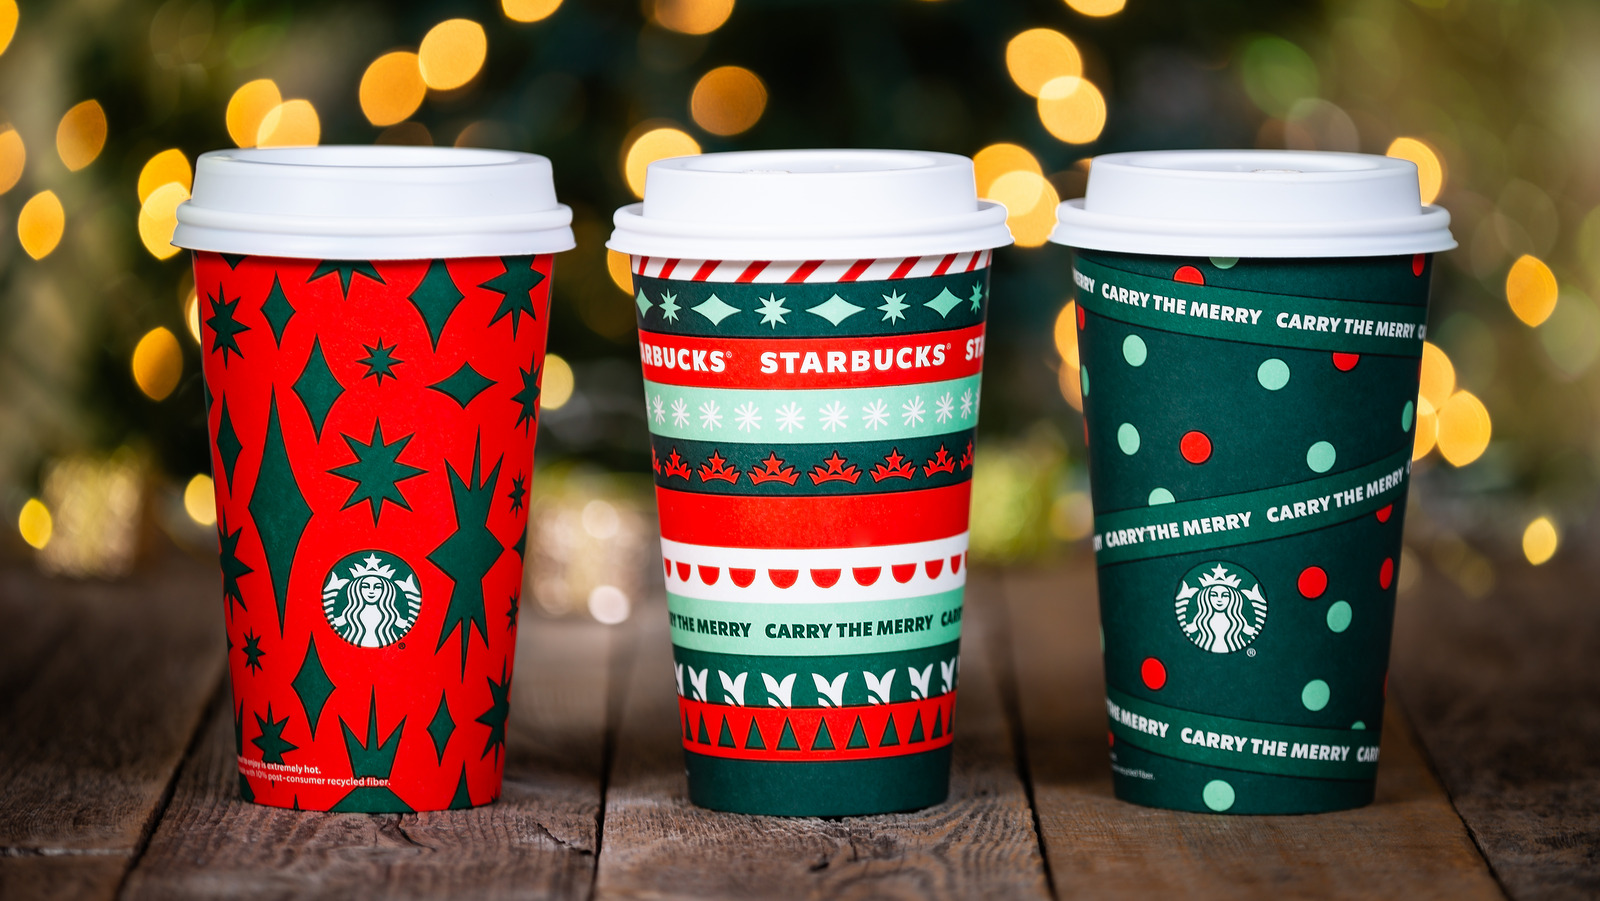 https://www.thedailymeal.com/img/gallery/starbucks-2024-winter-menu-has-allegedly-been-leaked/l-intro-1703866629.jpg